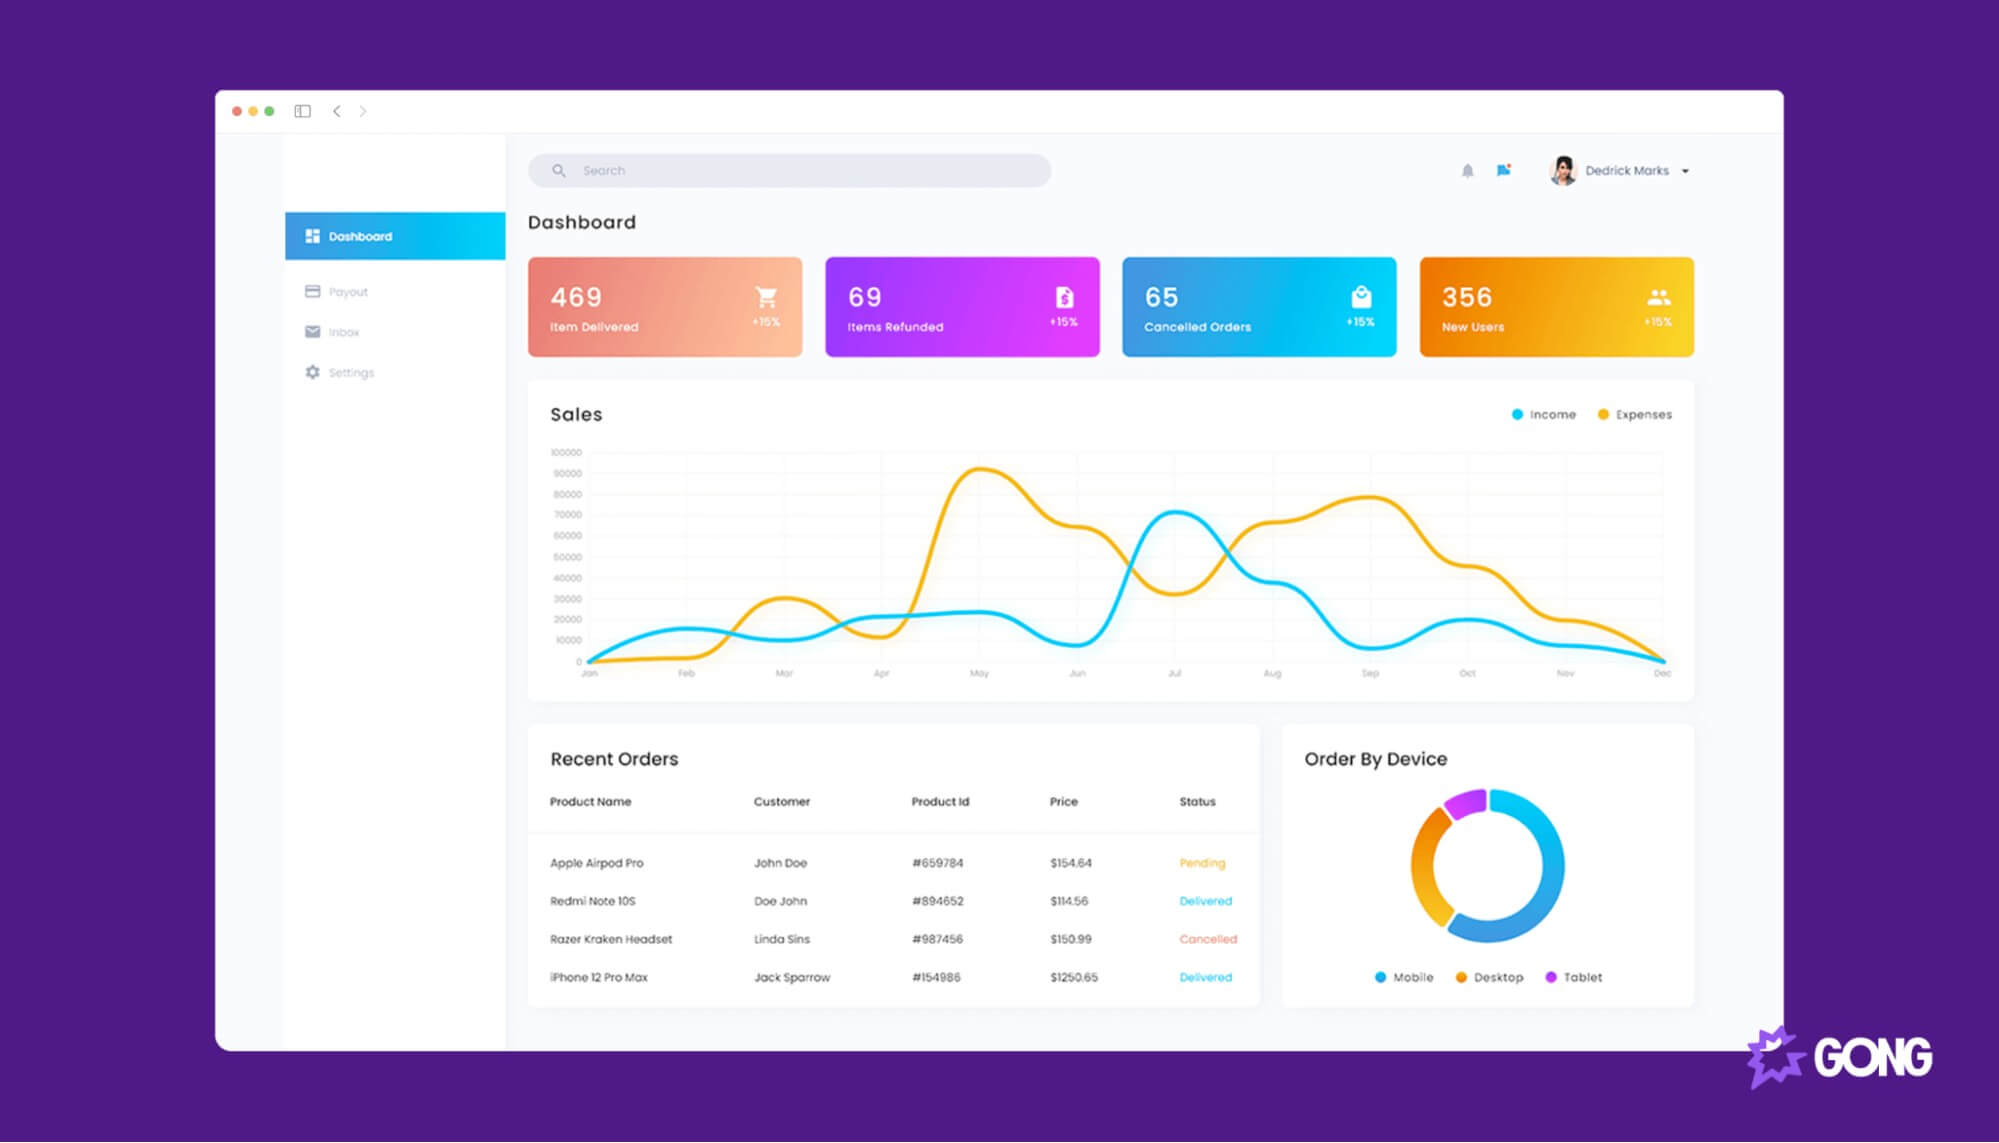 A sales report dashboard